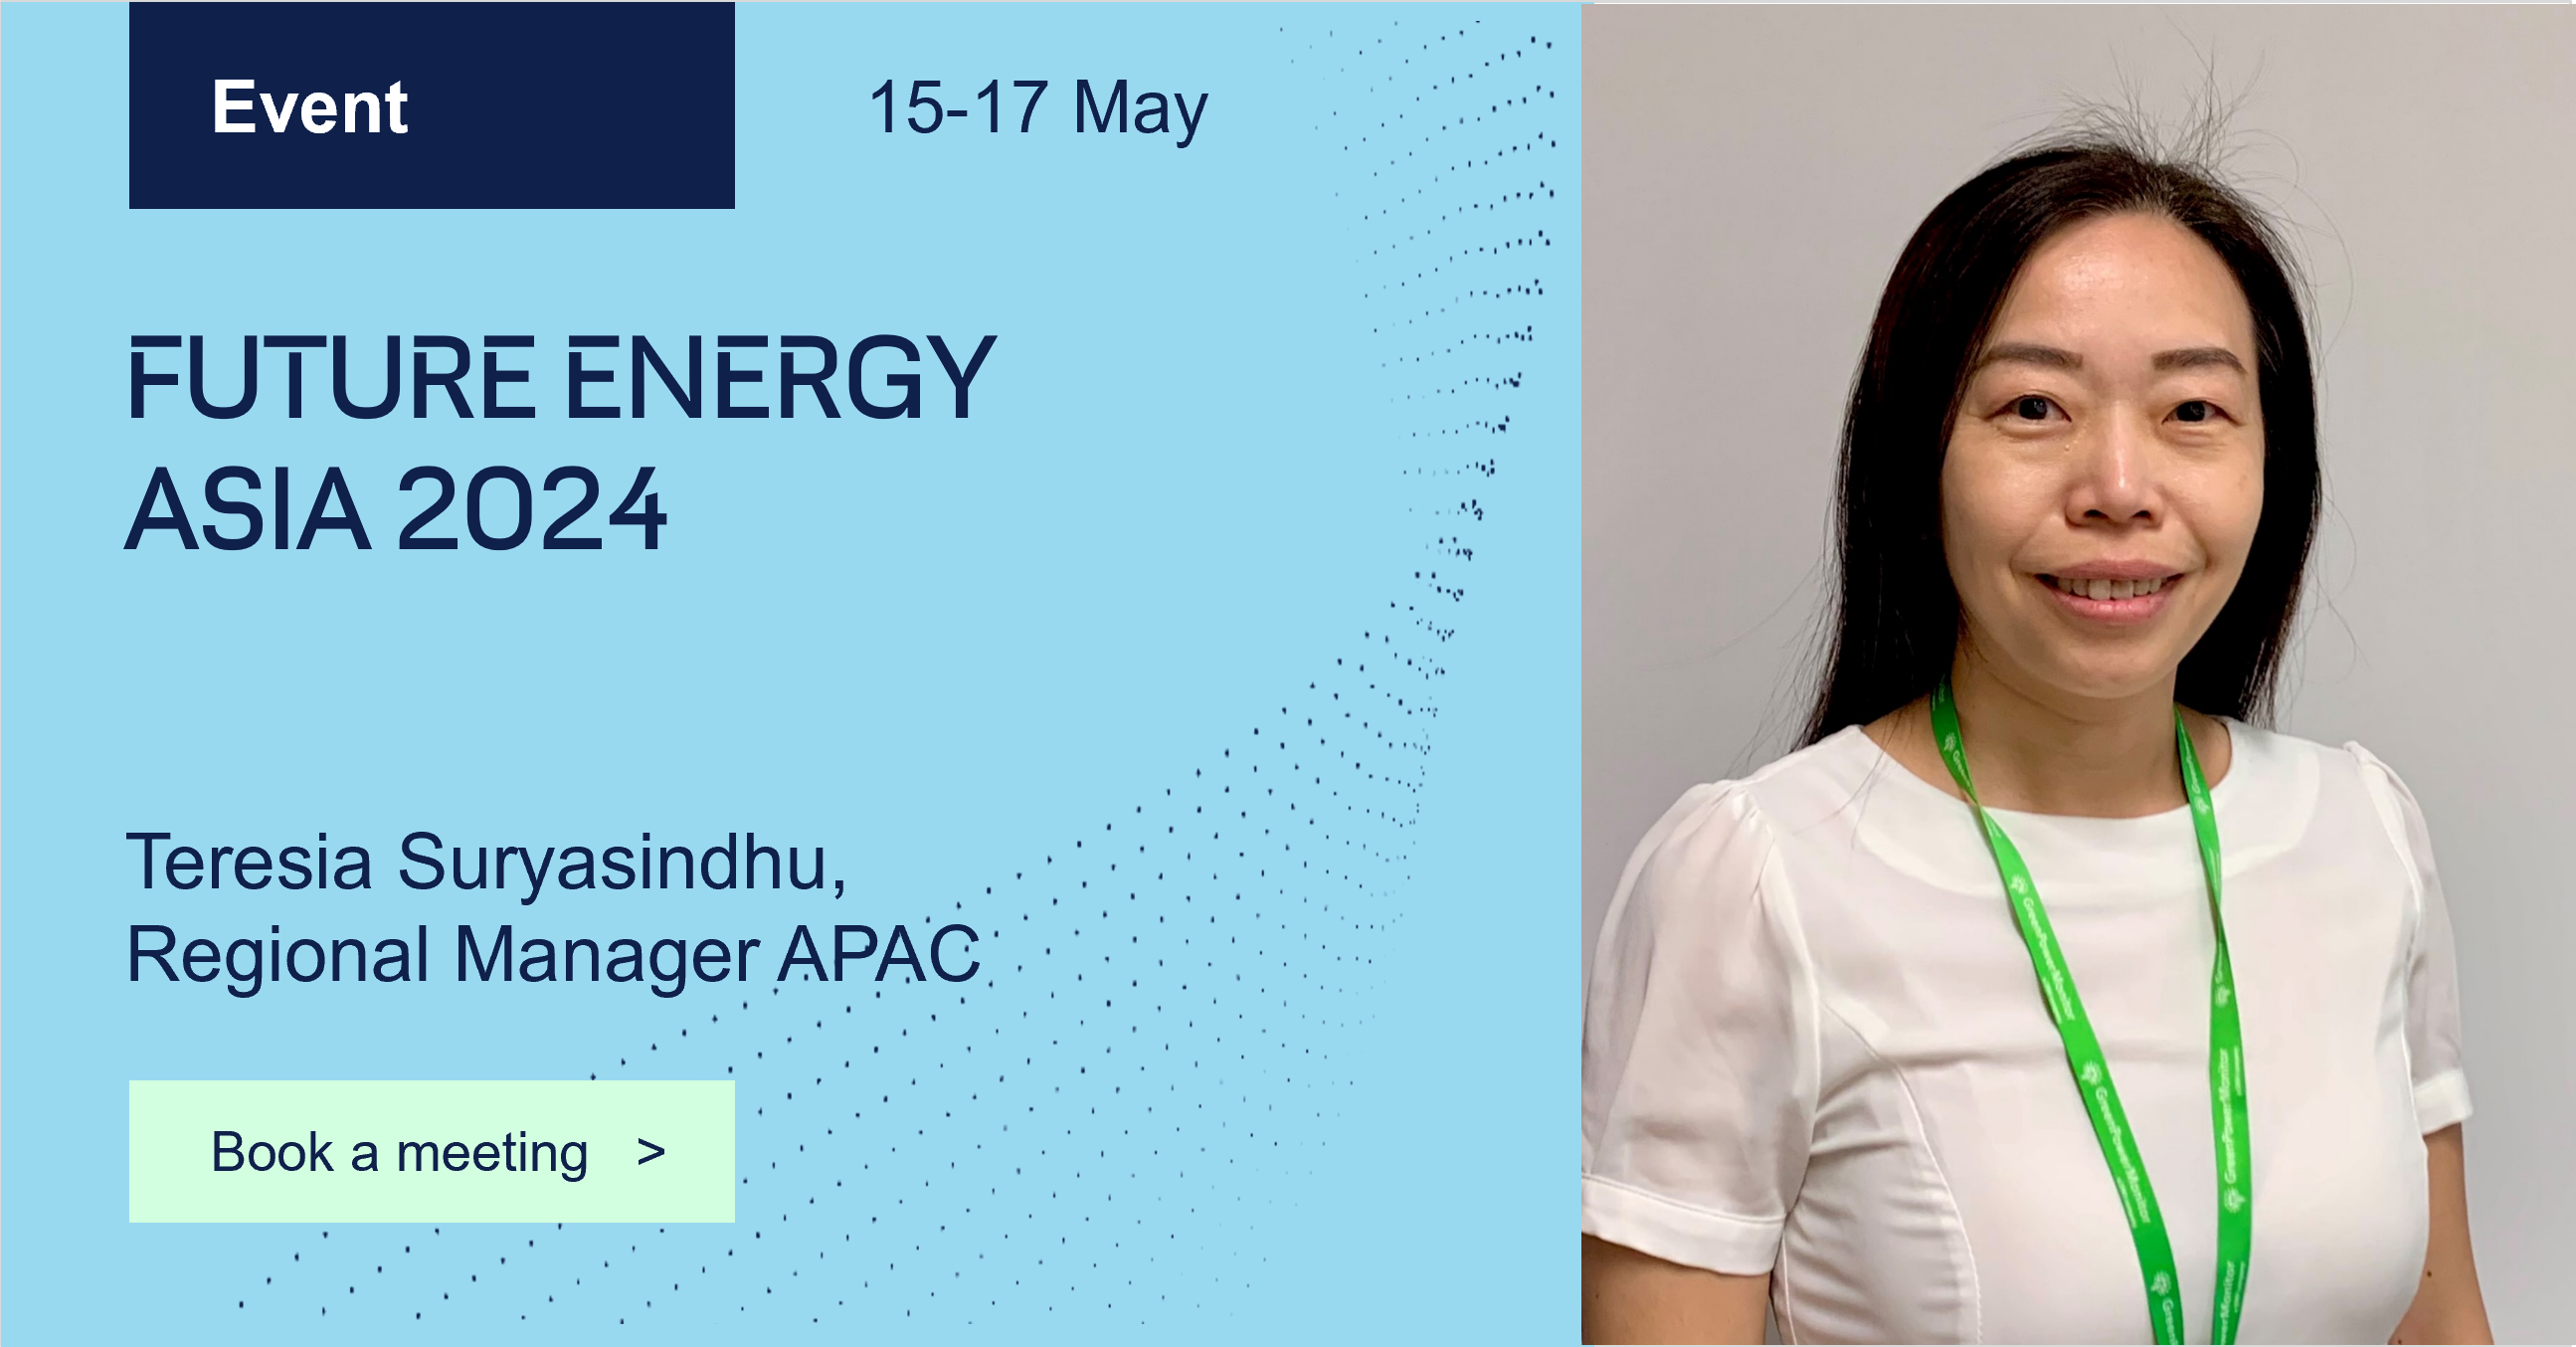 GPM to attend Future energy asia 2024